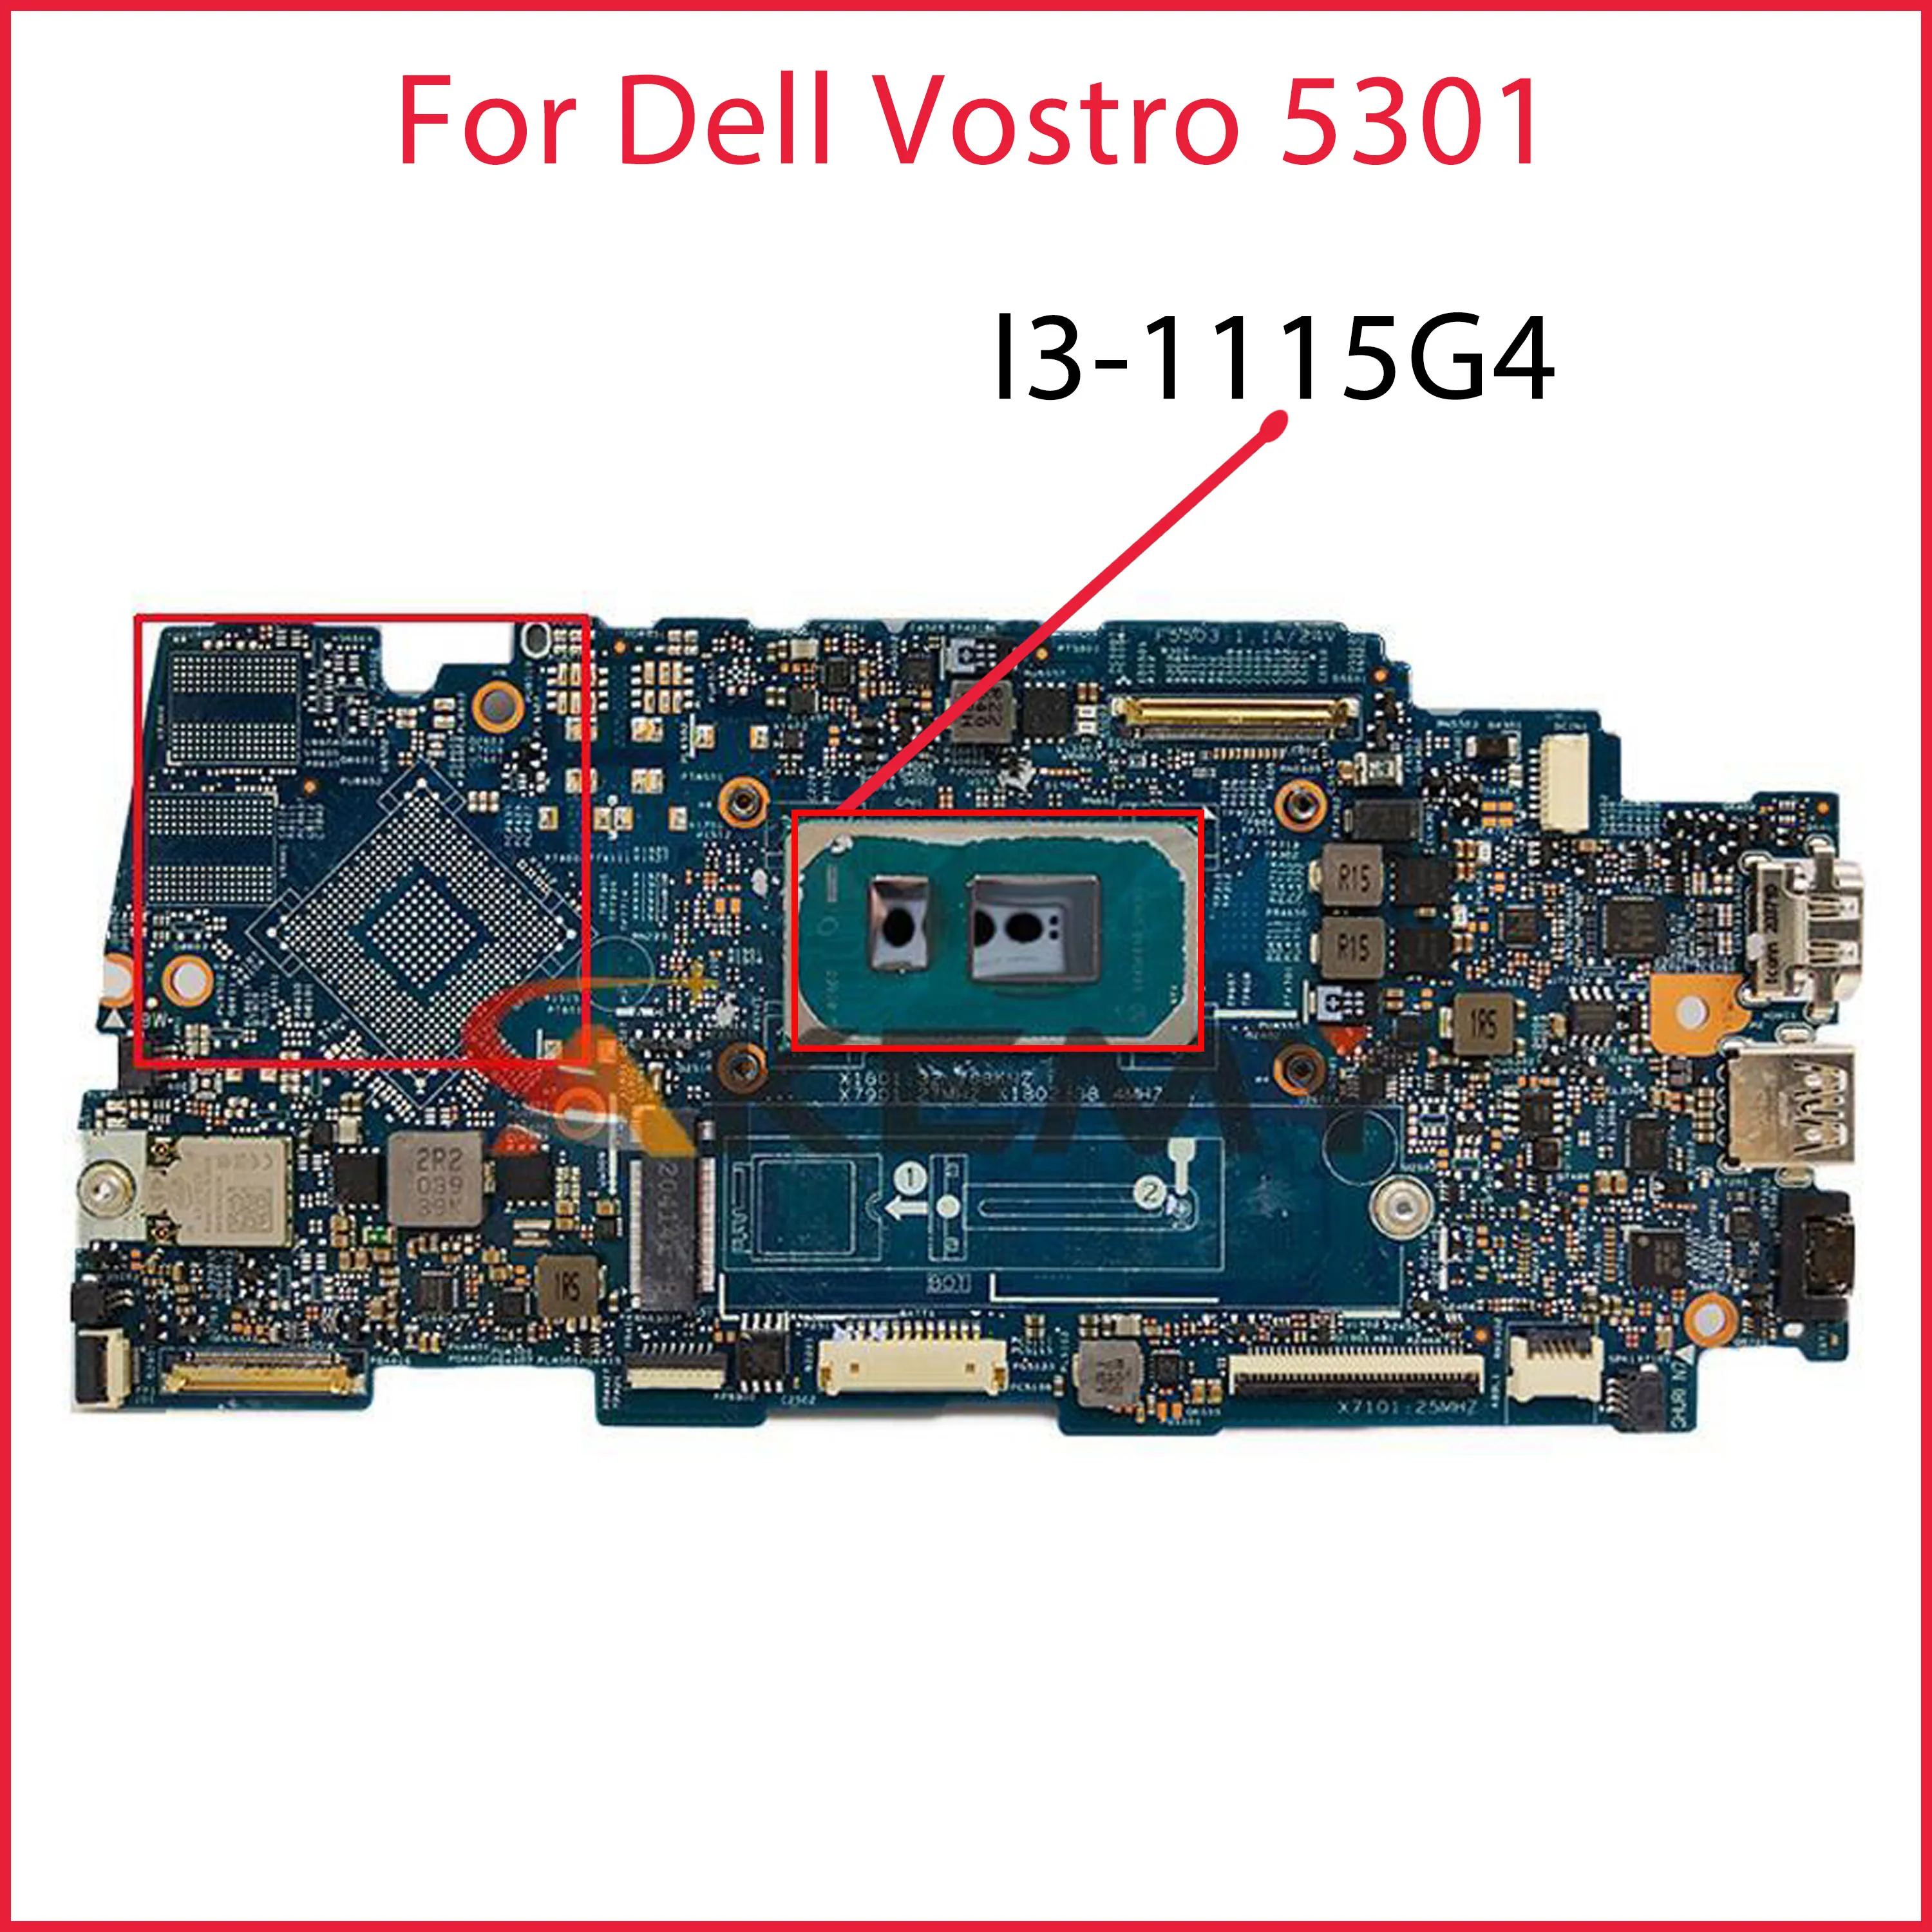 

For Dell Vostro 5301 Laptop Motherboard With I3-1115G4 CPU 8GB-RAM 2W1D5 19765-1 Mainboard CN-071W1W 71W1W 100% Fully Tested